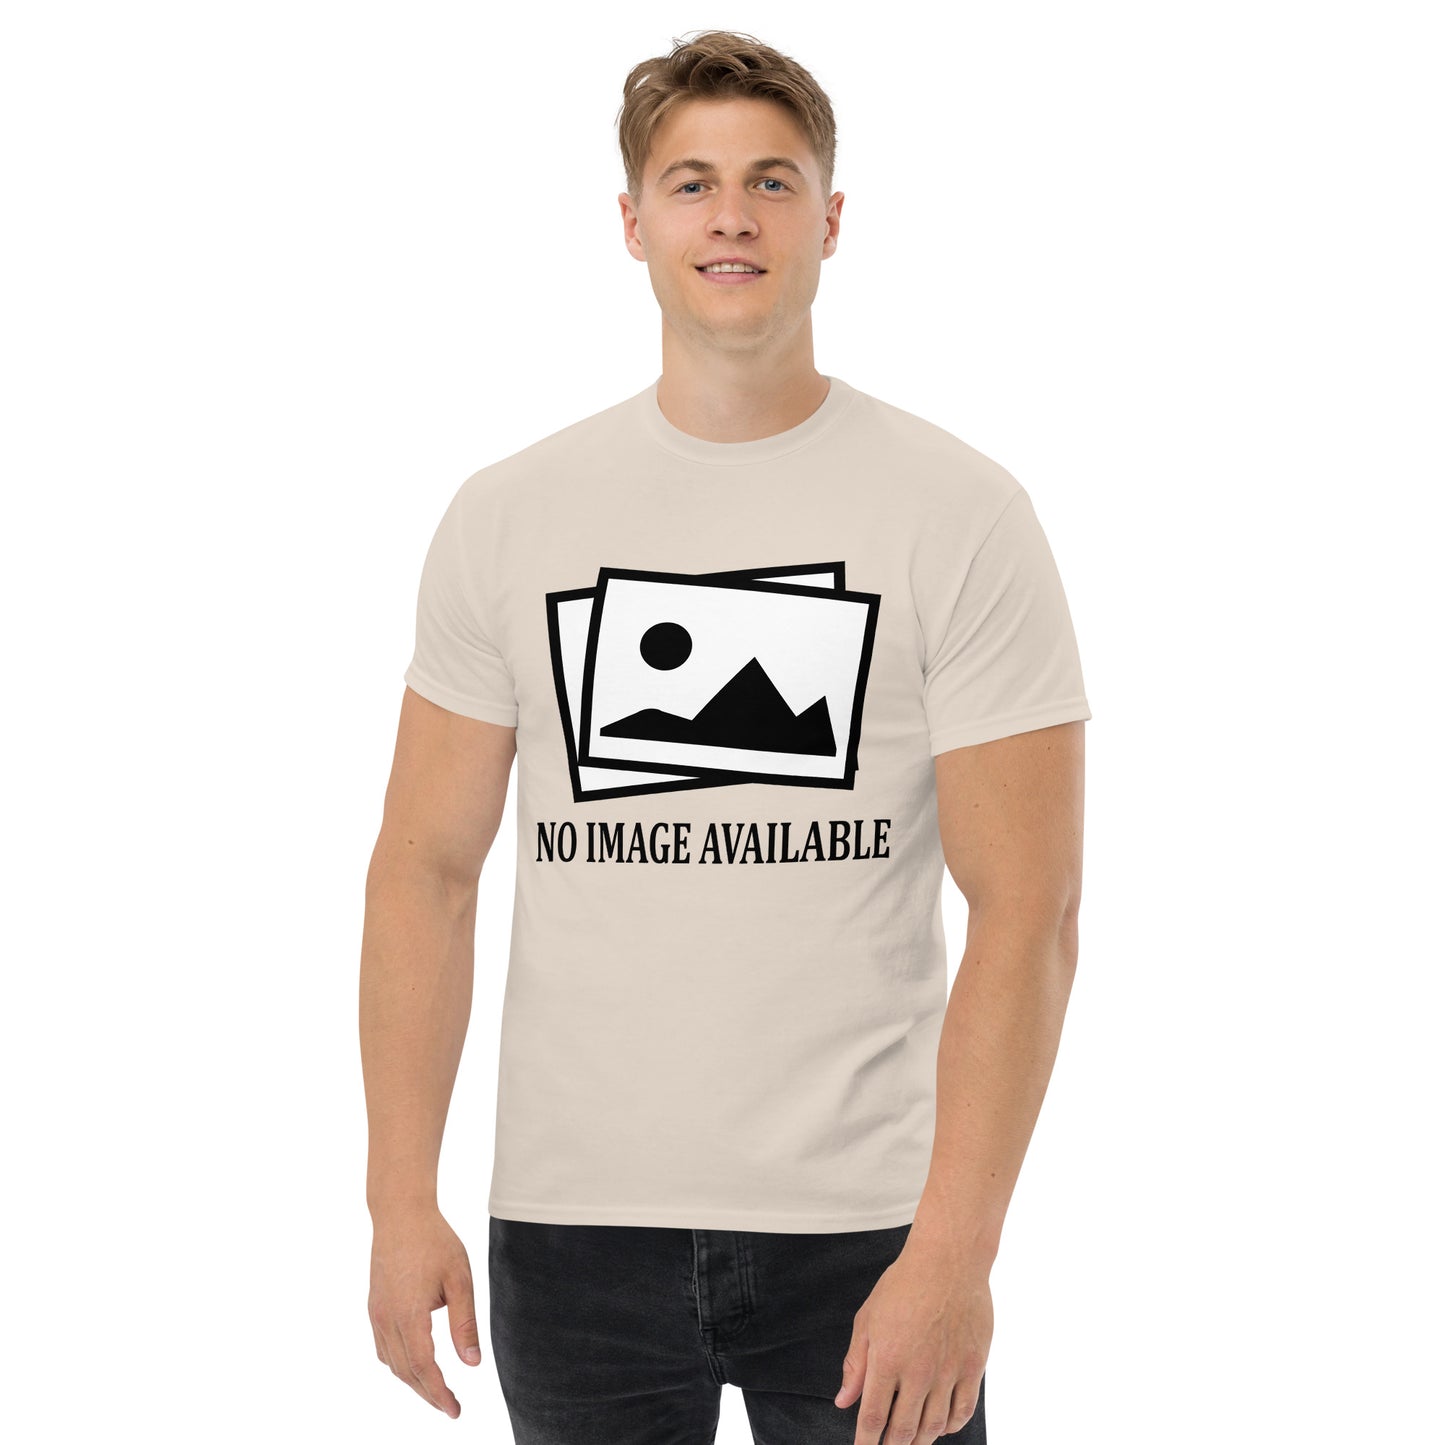 Men with white t-shirt with image and text "no image available"